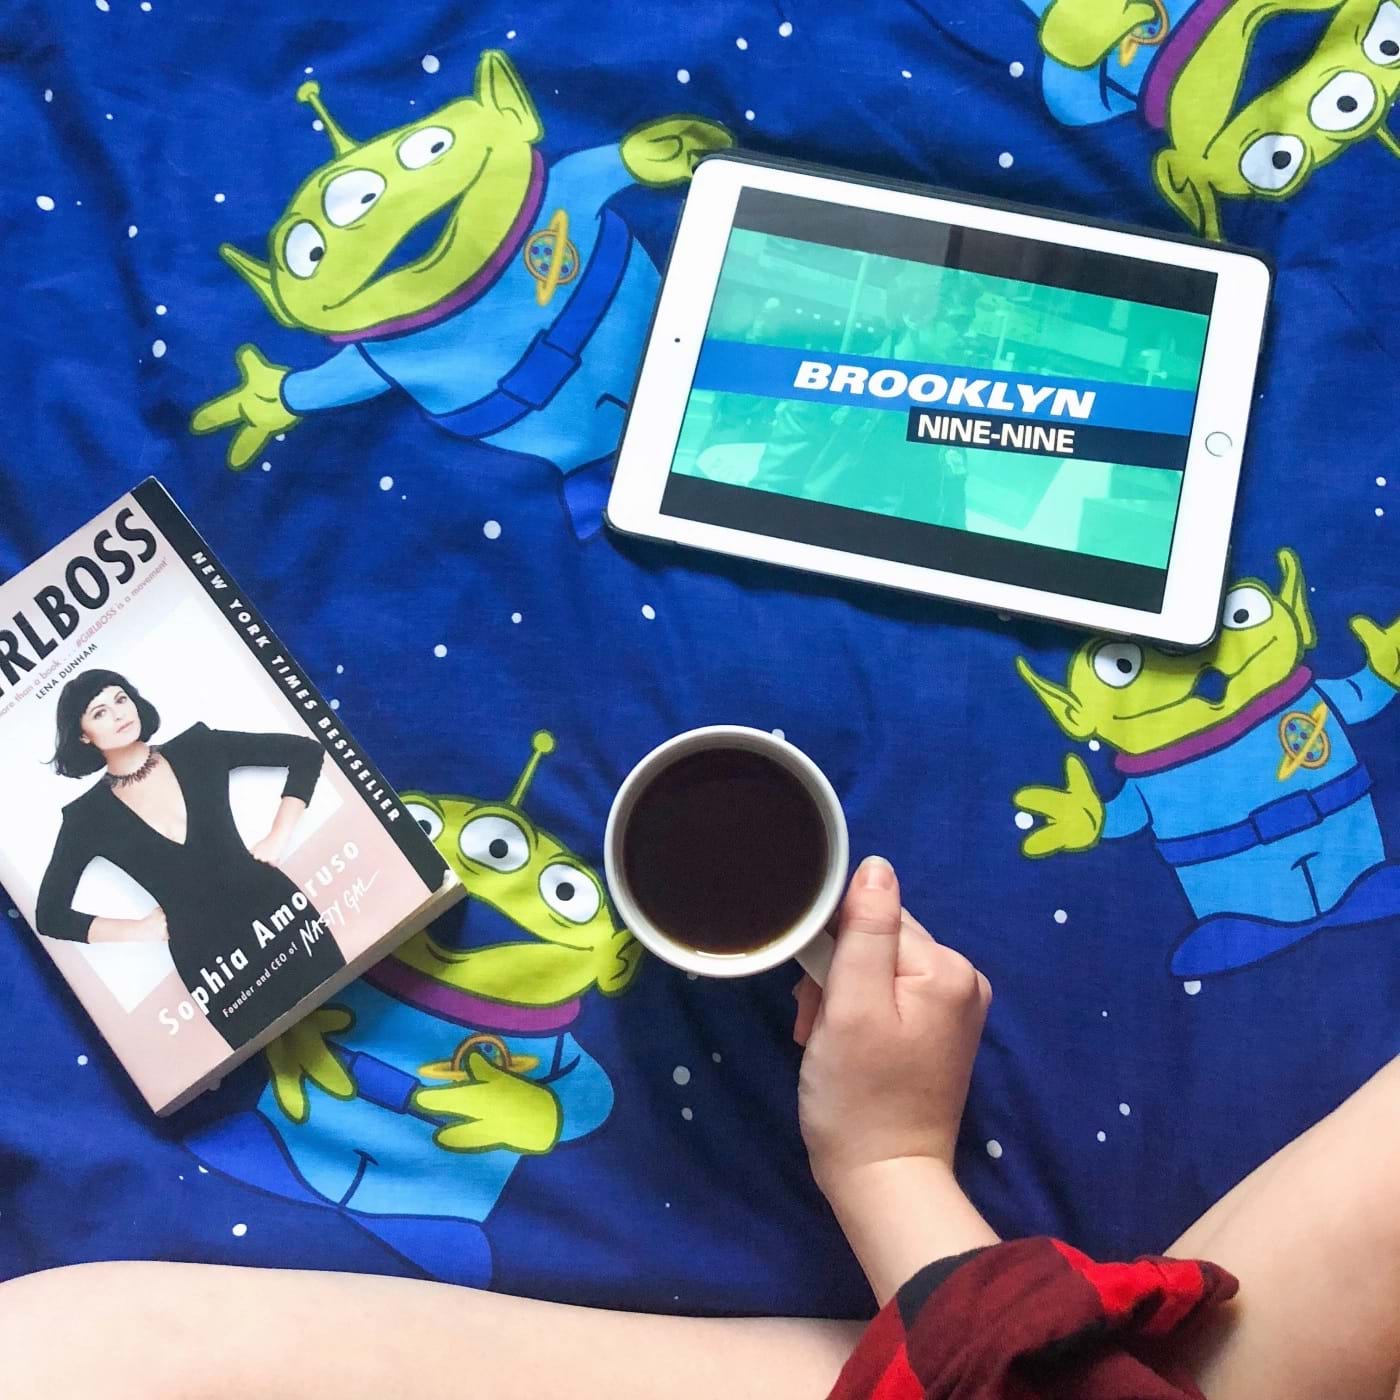 A duvet featuring the aliens from Toy Story, with a hand holding a cup of tea